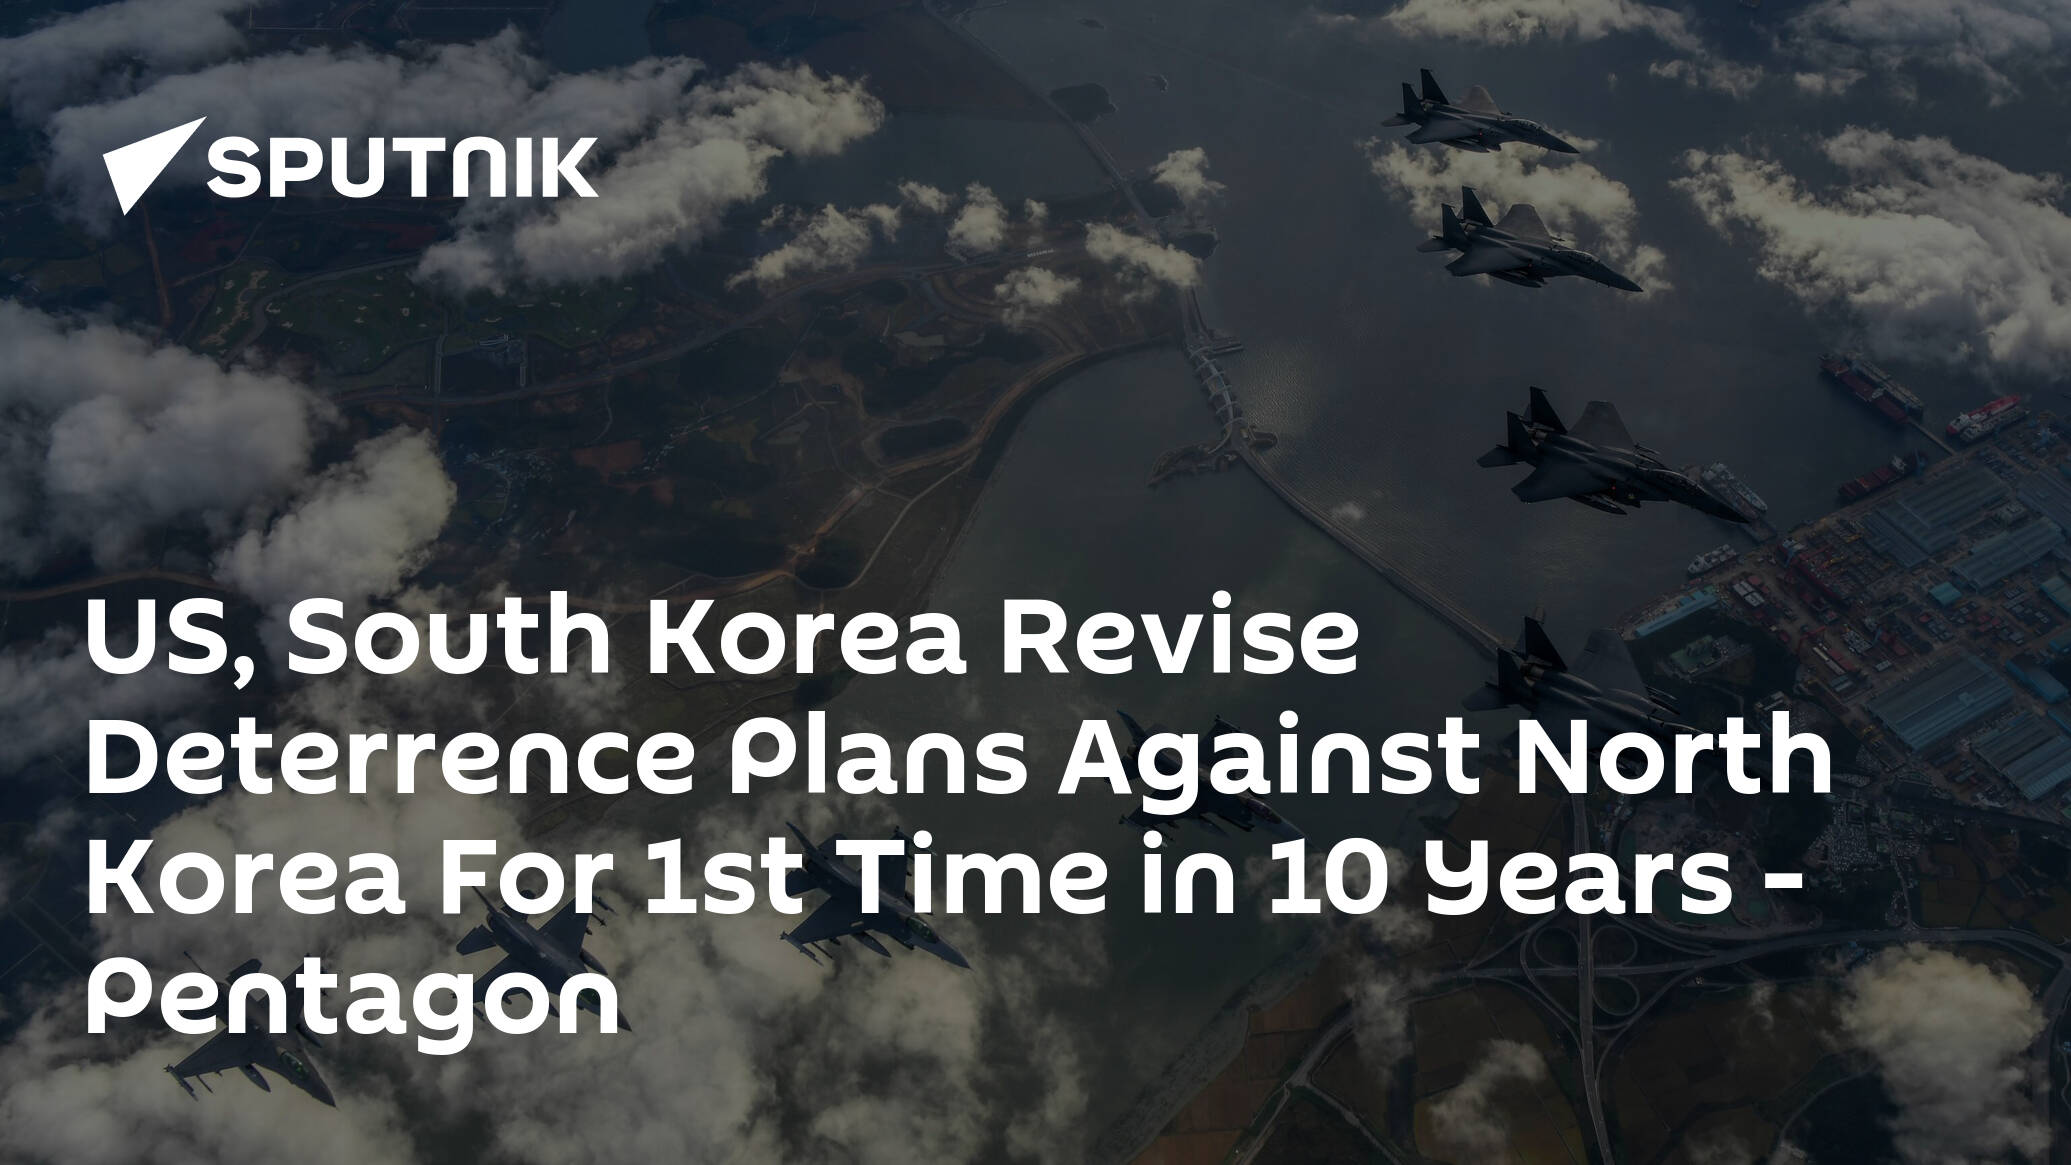 US, South Korea Revise Deterrence Plans Against North Korea For 1st Time in 10 Years – Pentagon